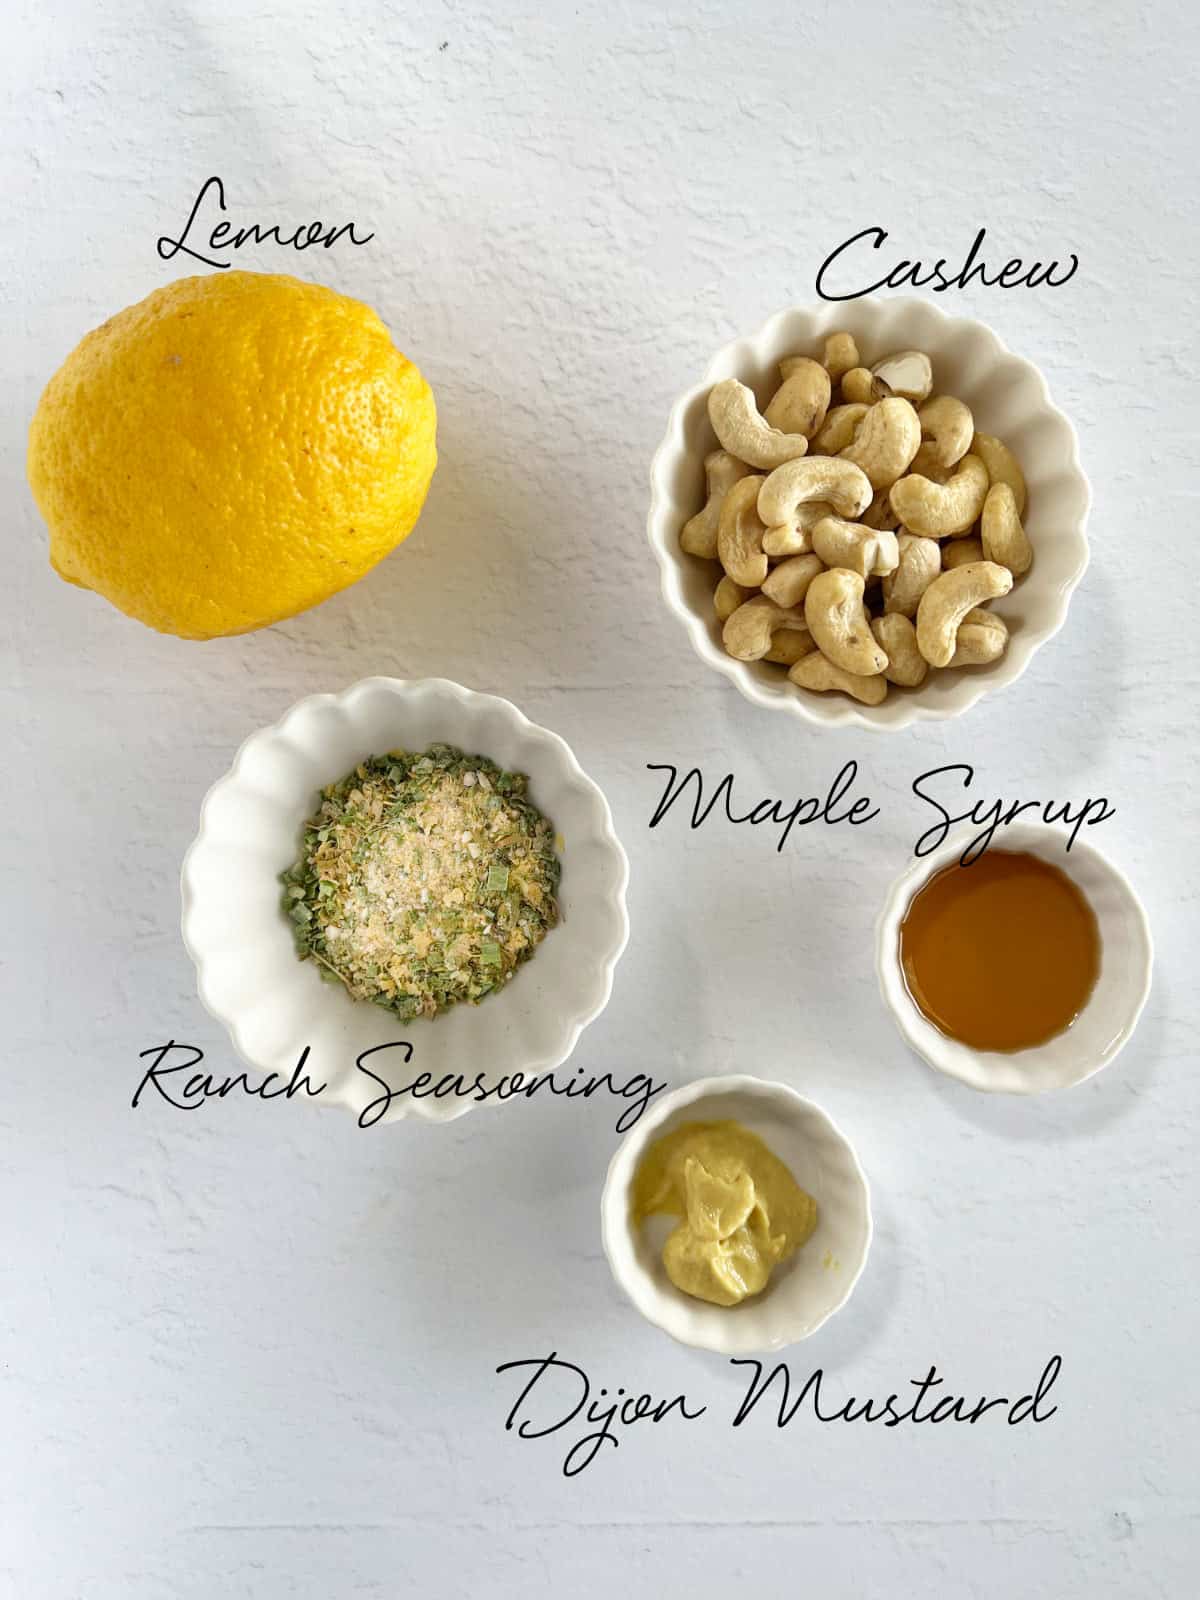 a lemon, cashews, ranch seasoning, mustard and maple syrup in bowls on a white bench top